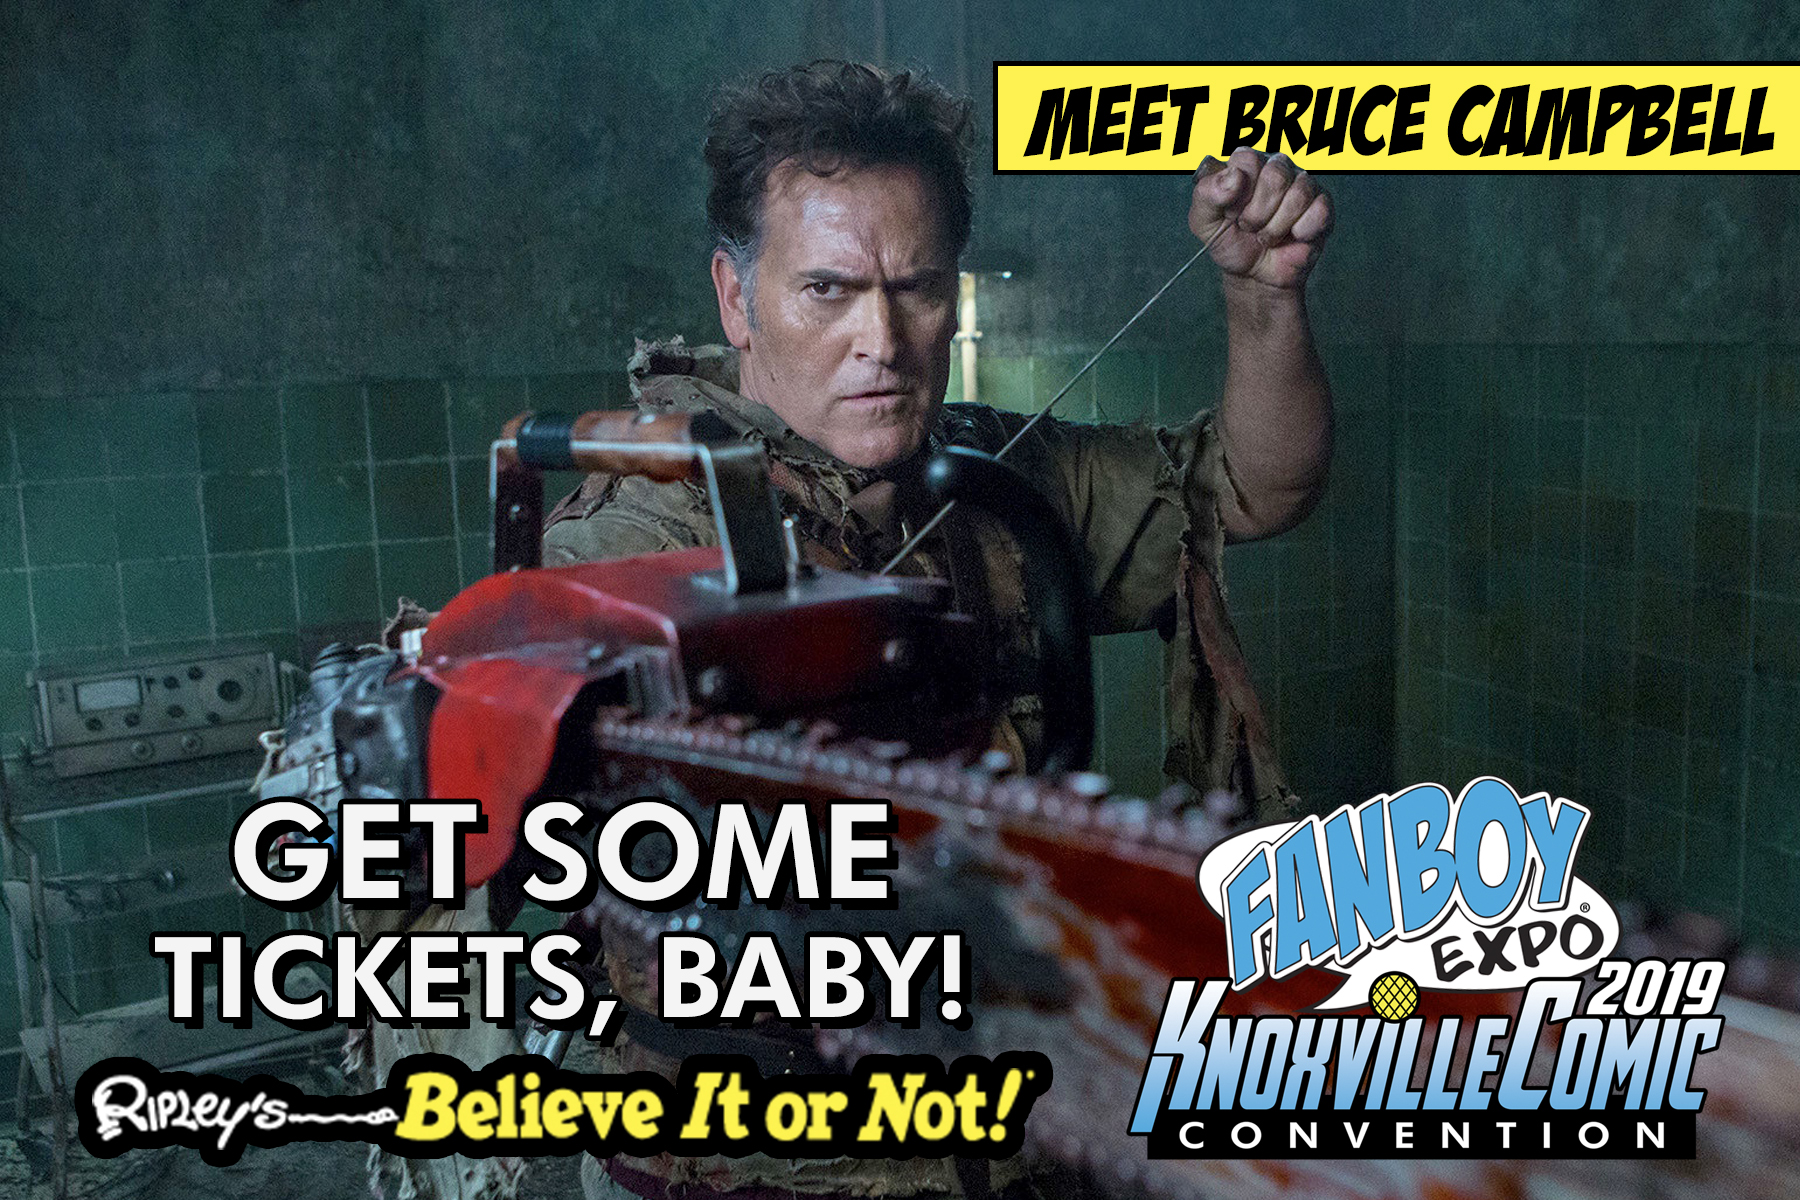 Meet Bruce Campbell at Fanboy Expo Knoxville Comic Con Fanboy Expo